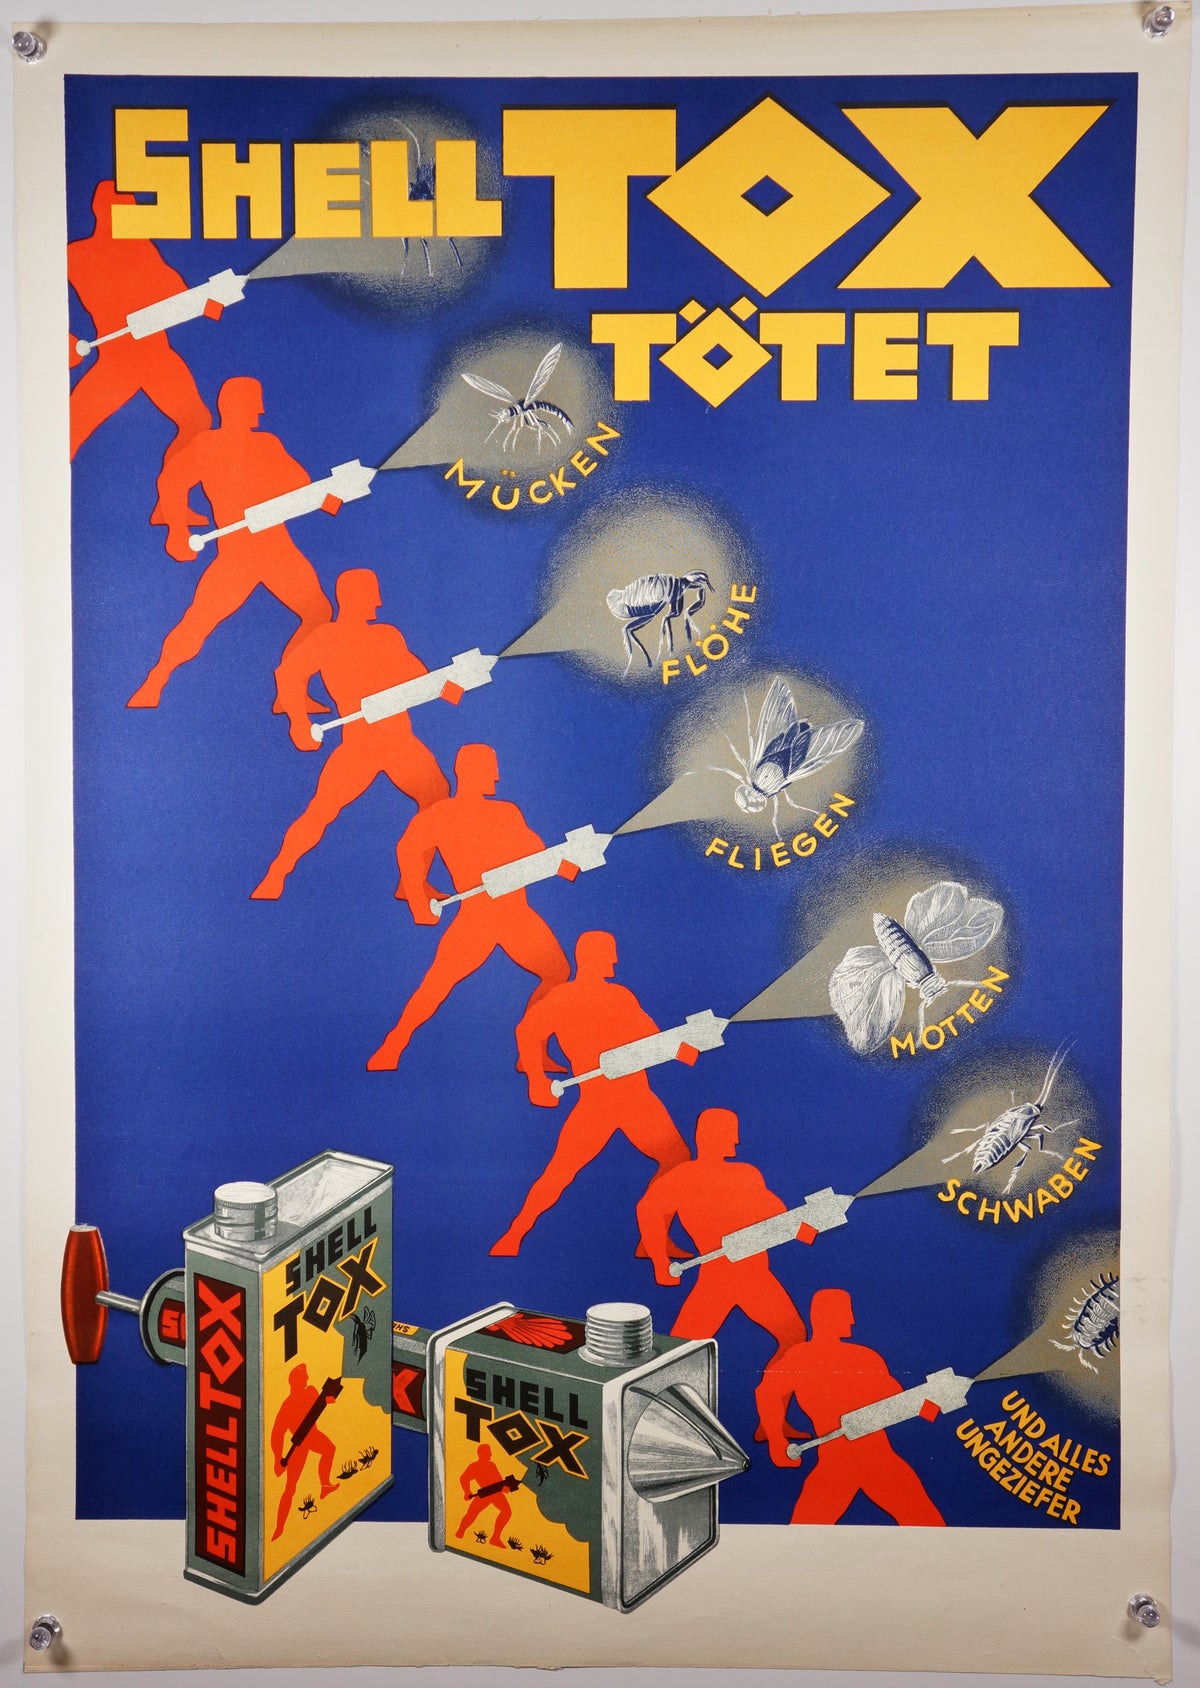 Shell Tox Totet - Authentic Vintage Poster